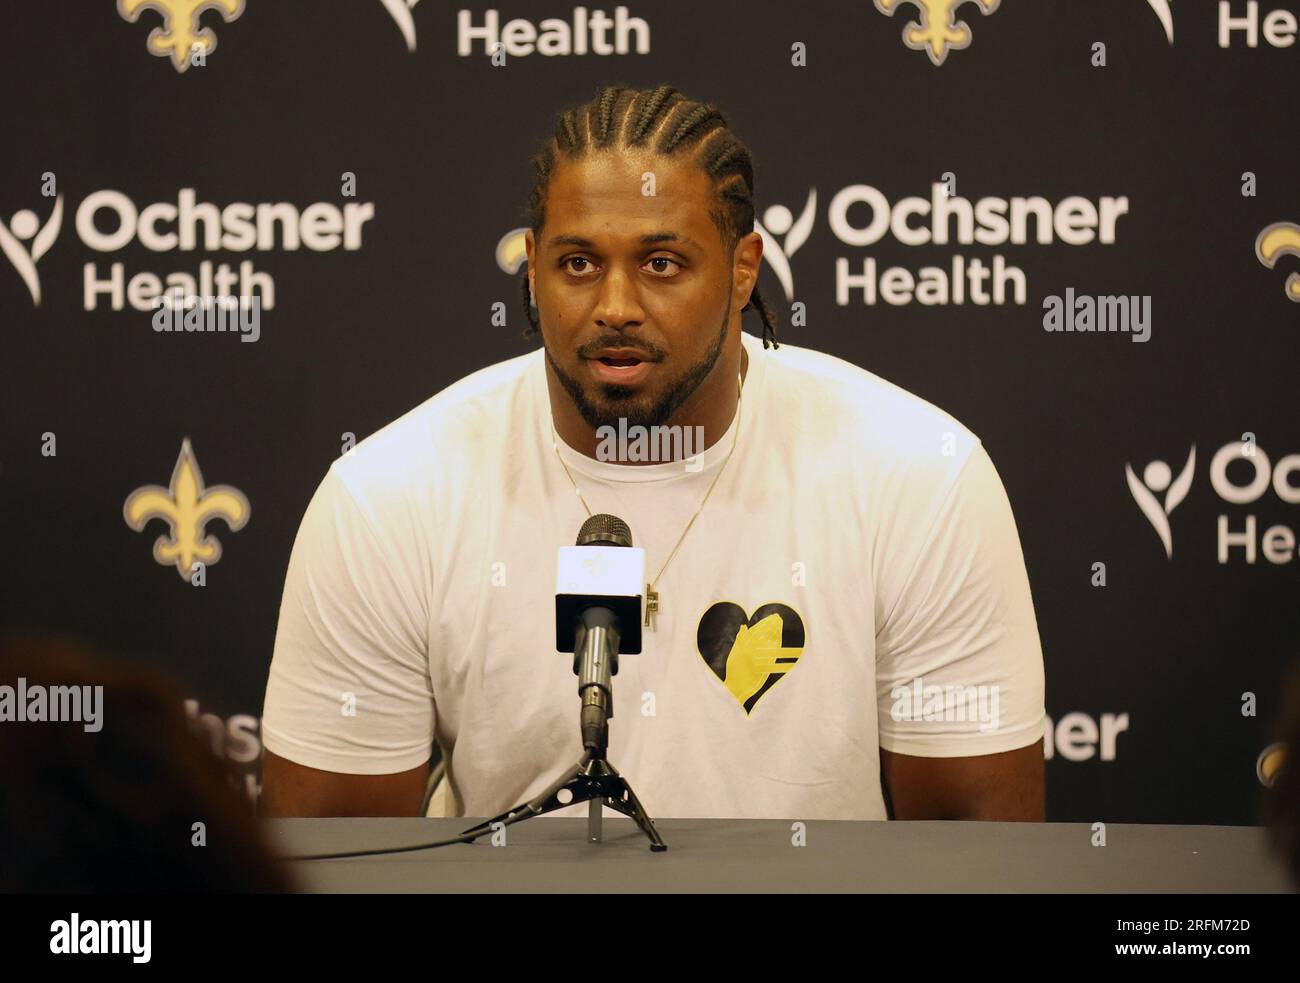 Cam Jordan signs contract extension with New Orleans Saints